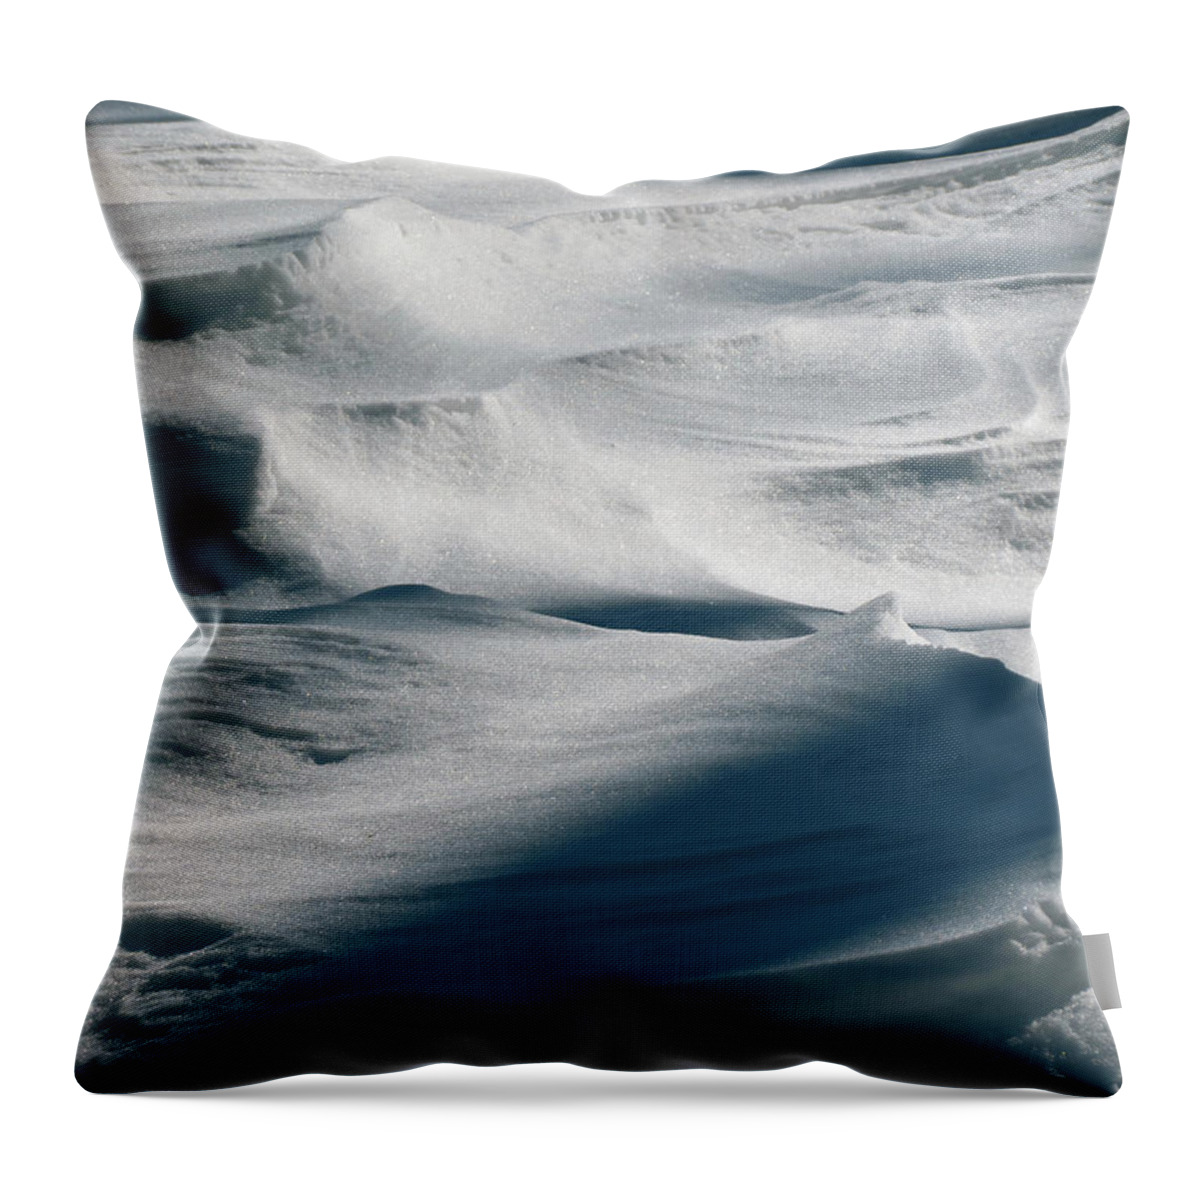 Snow Throw Pillow featuring the photograph Snow Drift by Azthet Photography